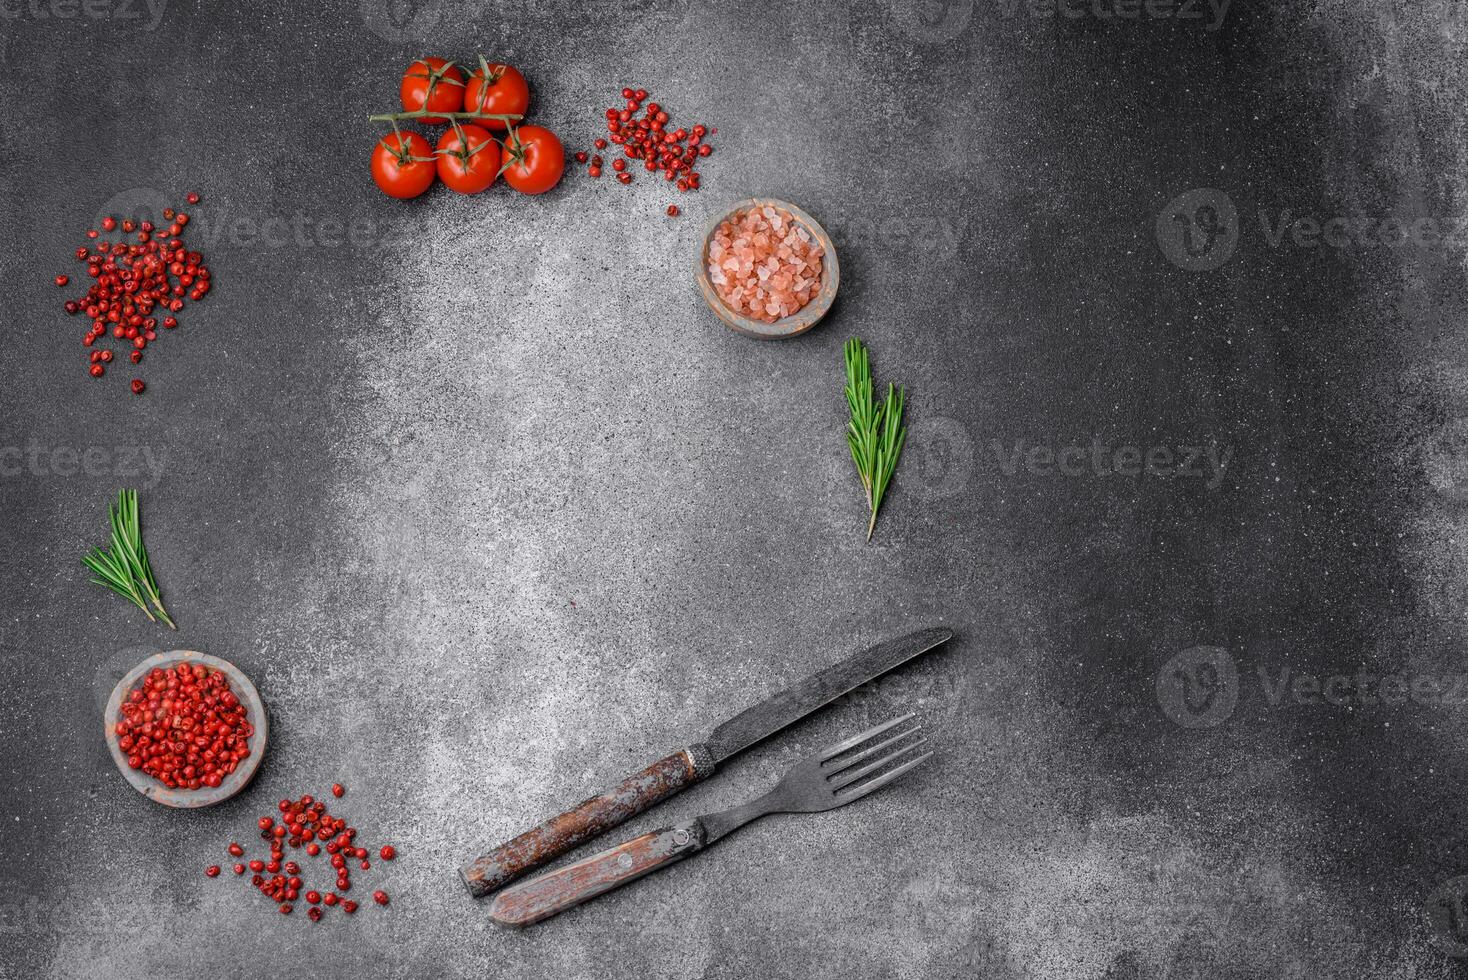 Ingredients, spices, salt, tomatoes, rosemary and cutlery knife and fork photo